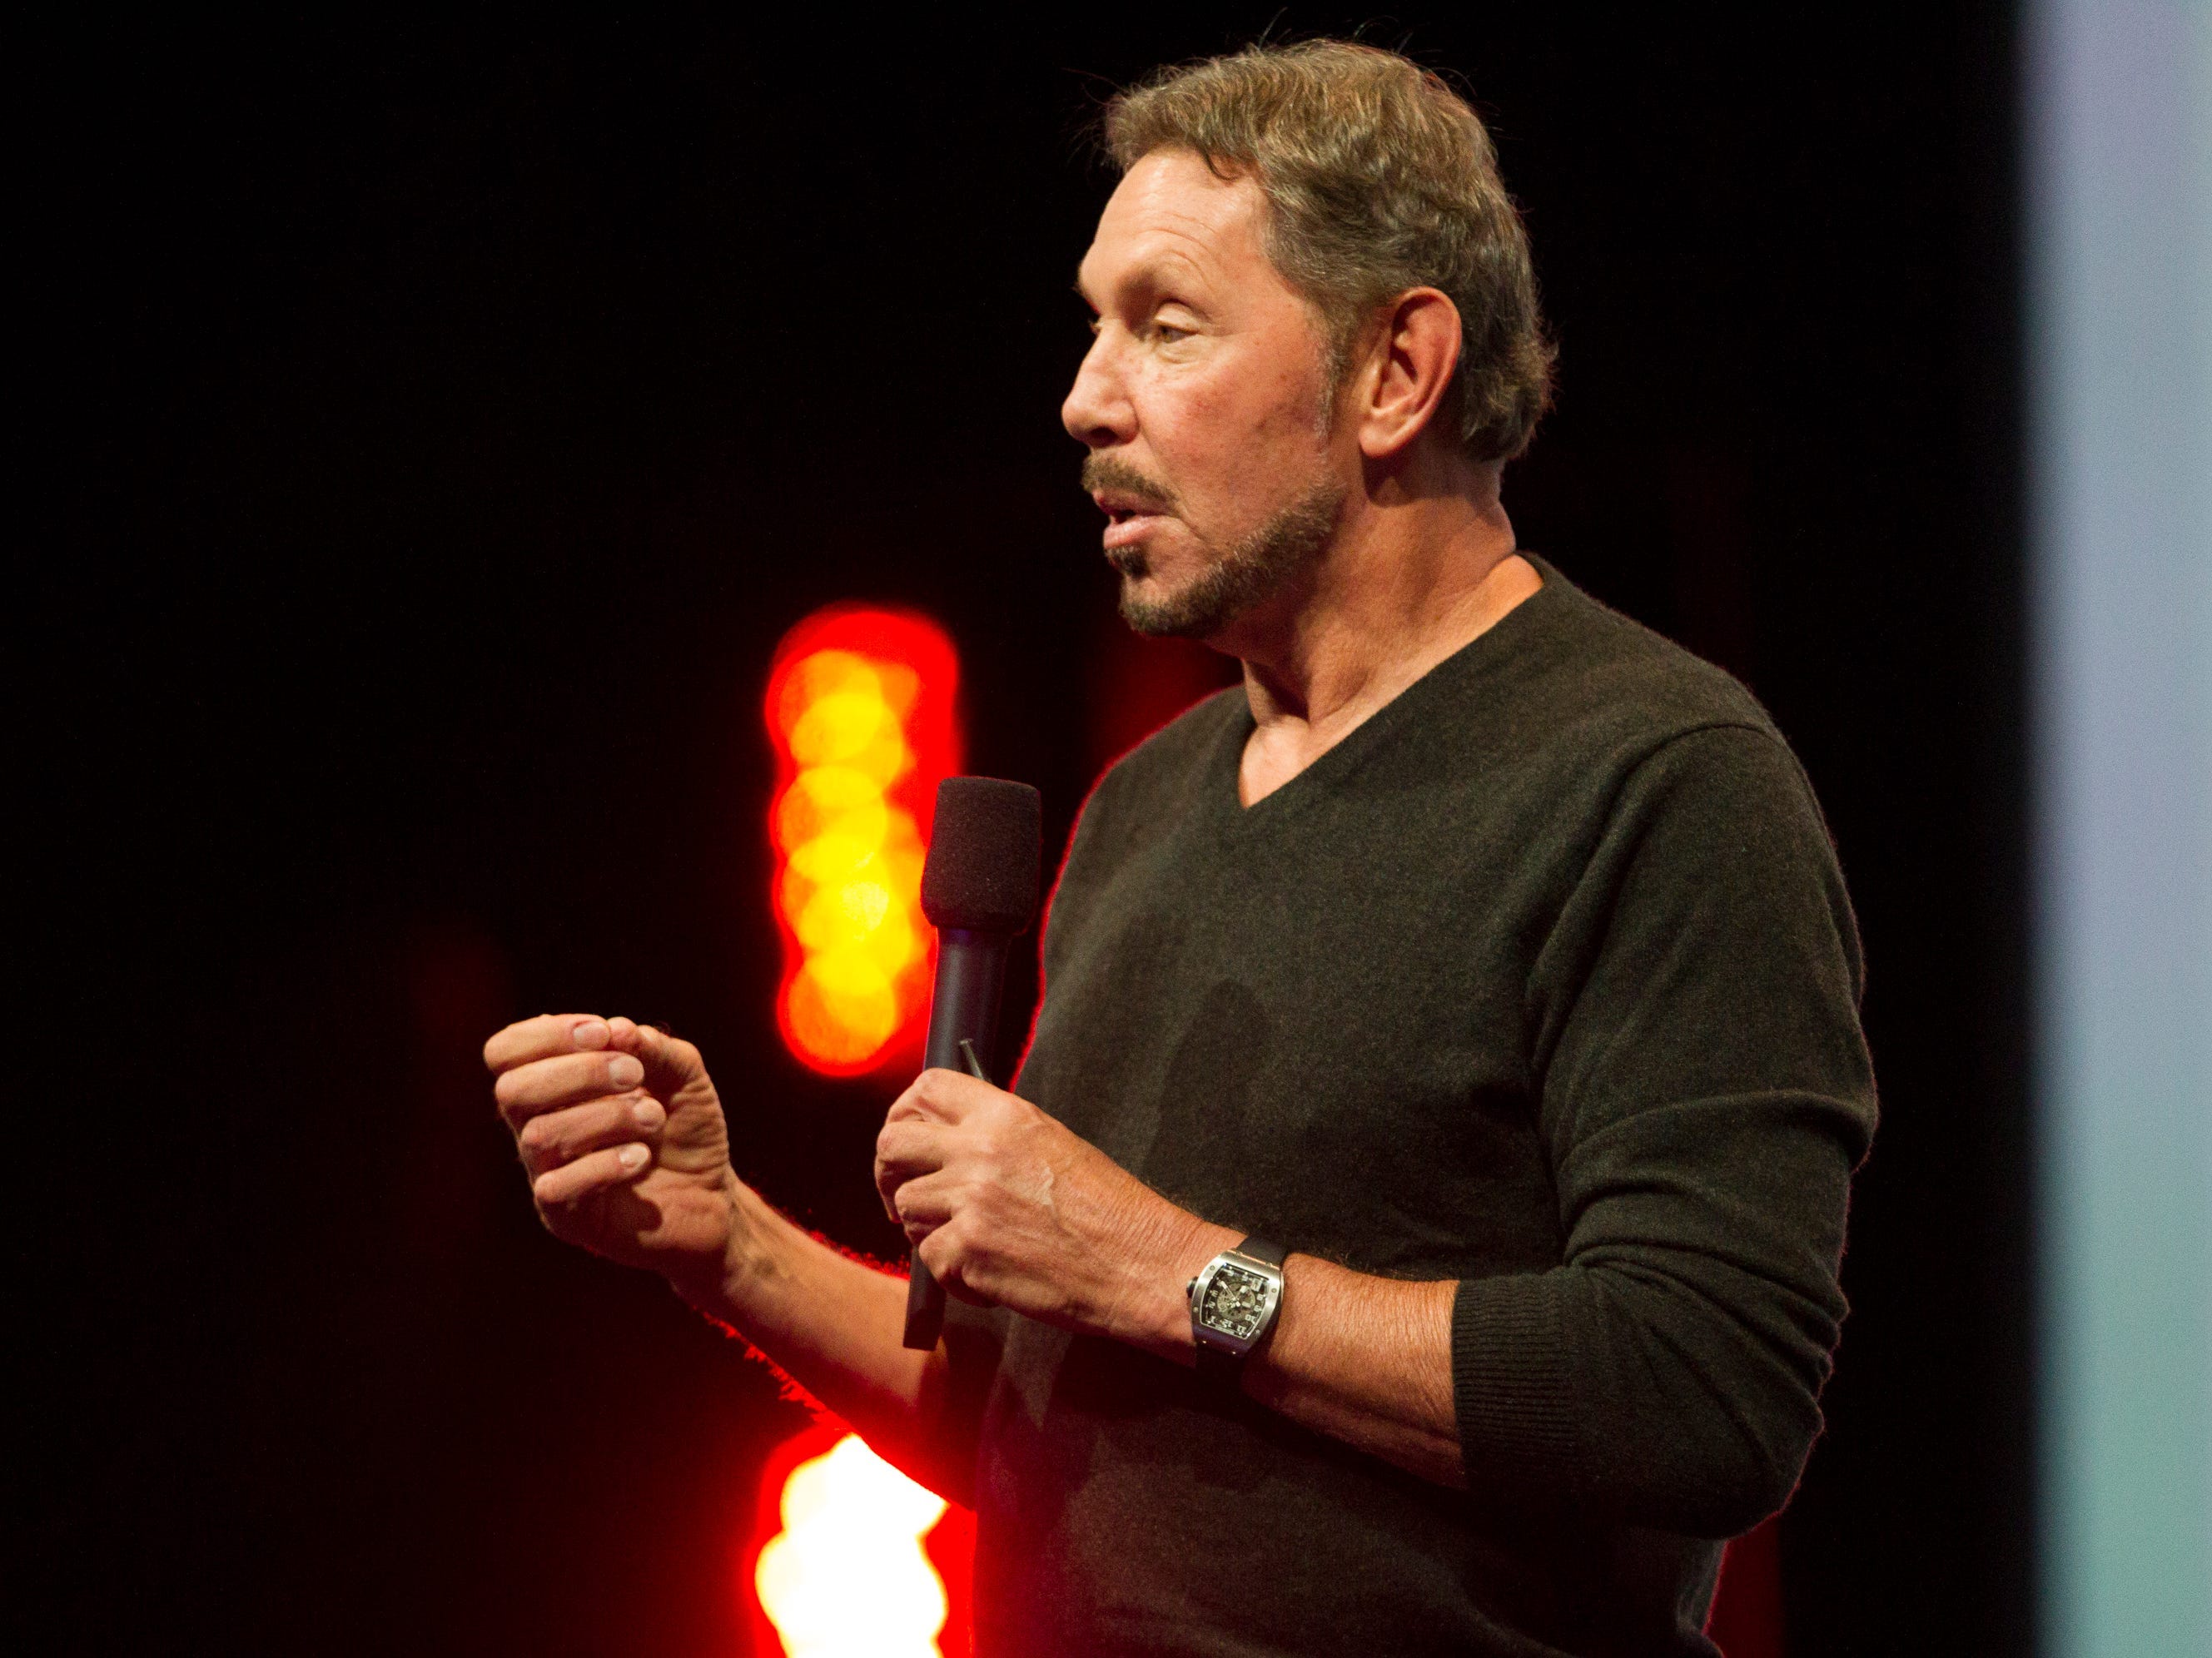 <p>Oracle joined other tech giants, like Salesforce, in backing the tech startup in June 2023. It began offering generative AI to its clients based on <a href="https://www.businessinsider.com/oracle-chooses-cohere-ai-startup-best-alternative-openai-2023-6">tech made by Cohere</a>.</p><p>"Cohere and Oracle are working together to make it very, very easy for enterprise customers to train their own specialized large language models while protecting the privacy of their training data," Ellison previously said.</p>